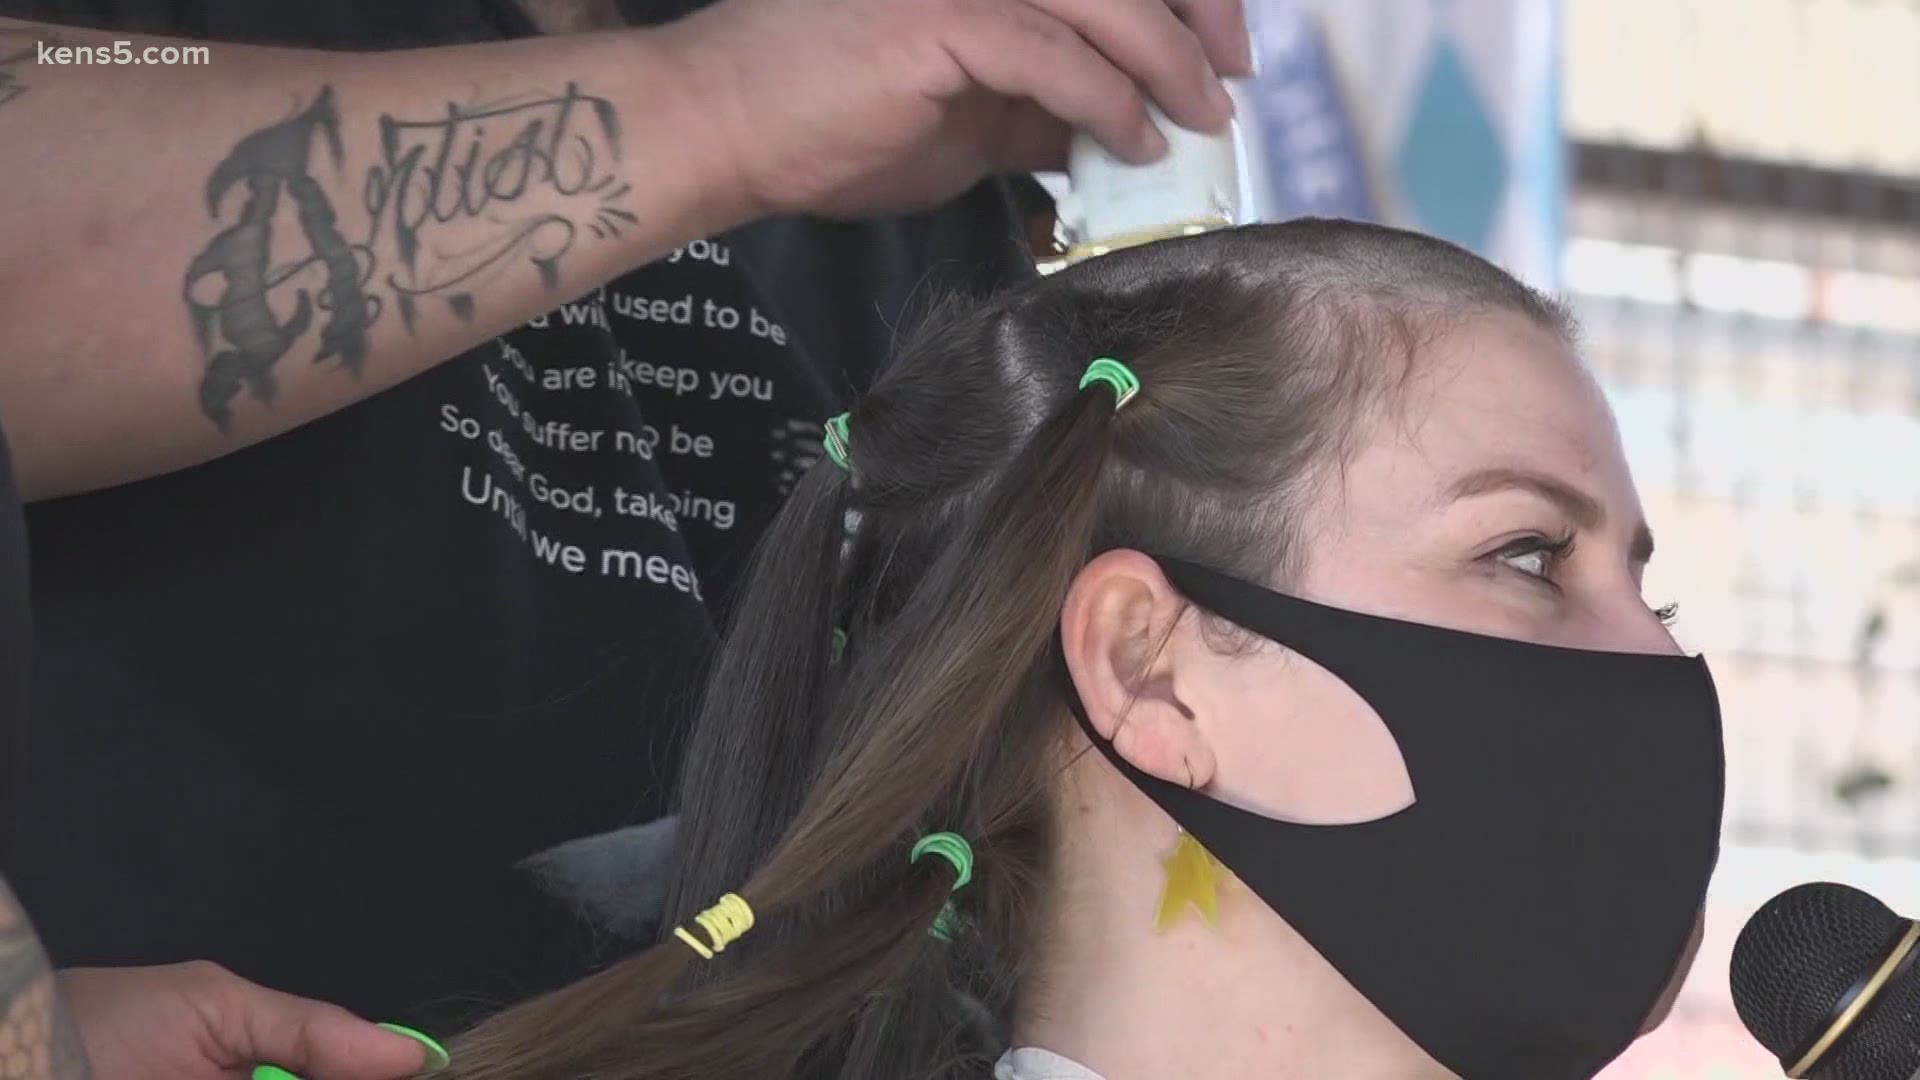 Dozens of people gave up their locks in order to raise money and awareness in the ongoing cancer fight.